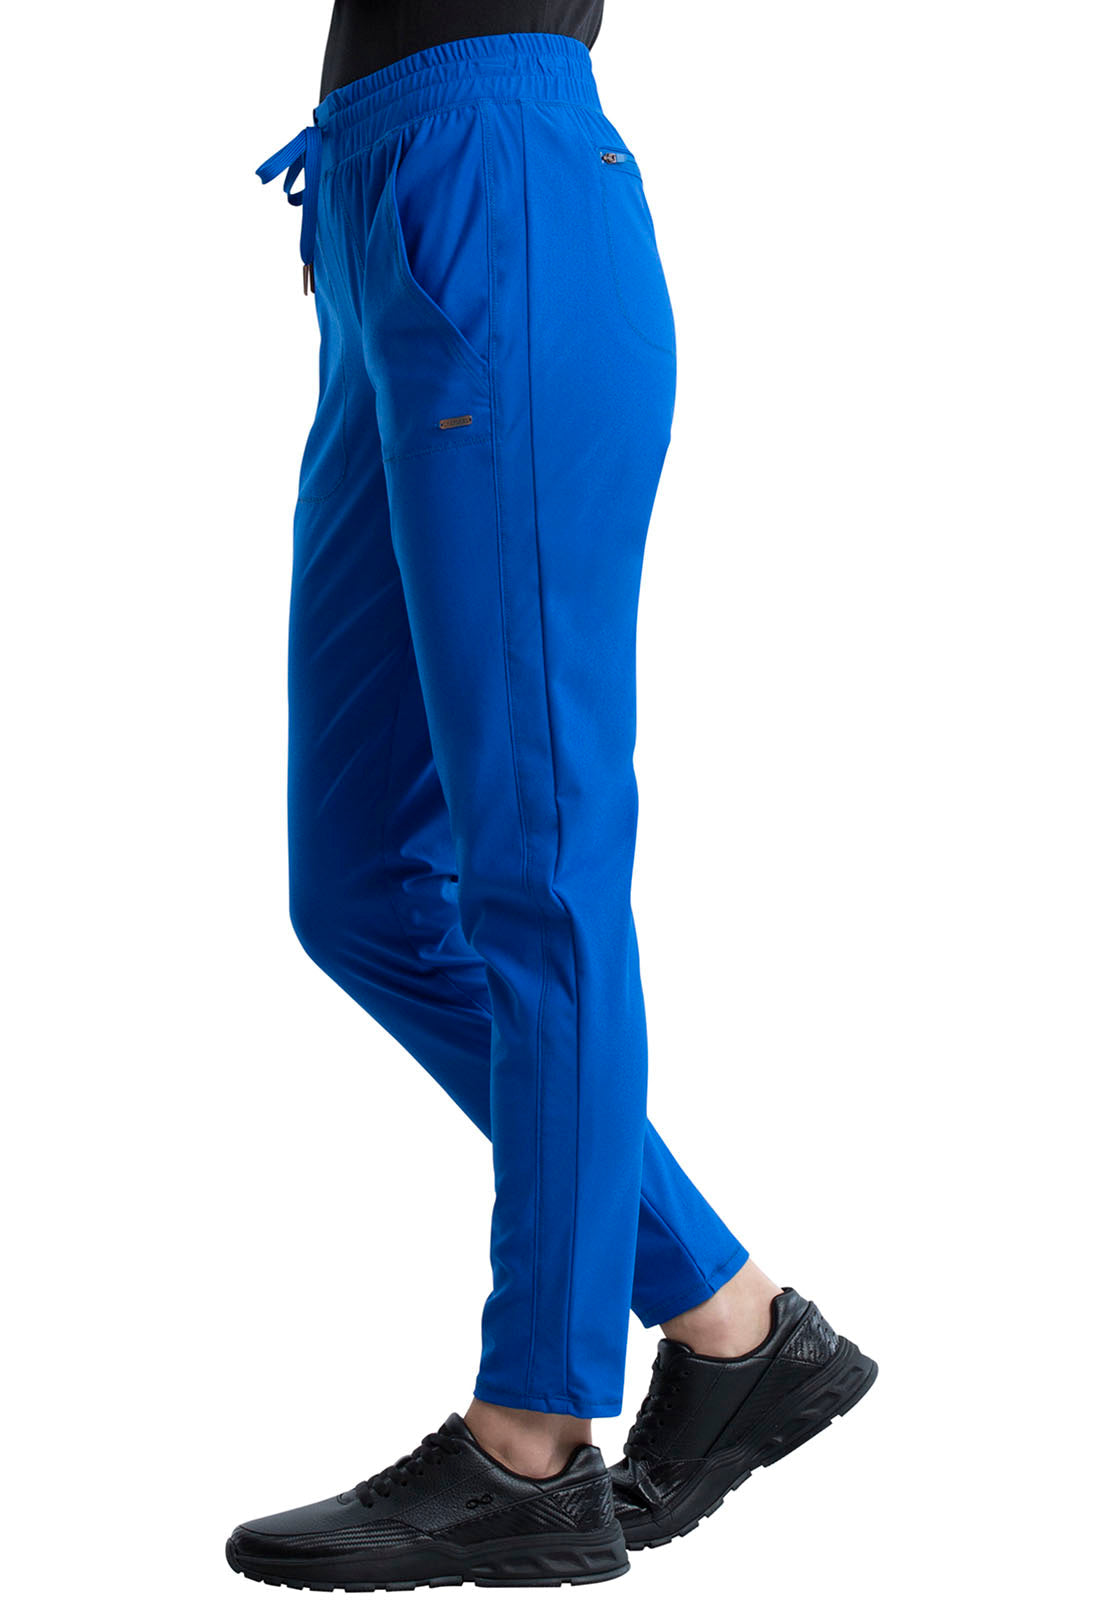 Cherokee Form Tapered Leg Drawstring Pant (Tall Lengths Up to 2XL)